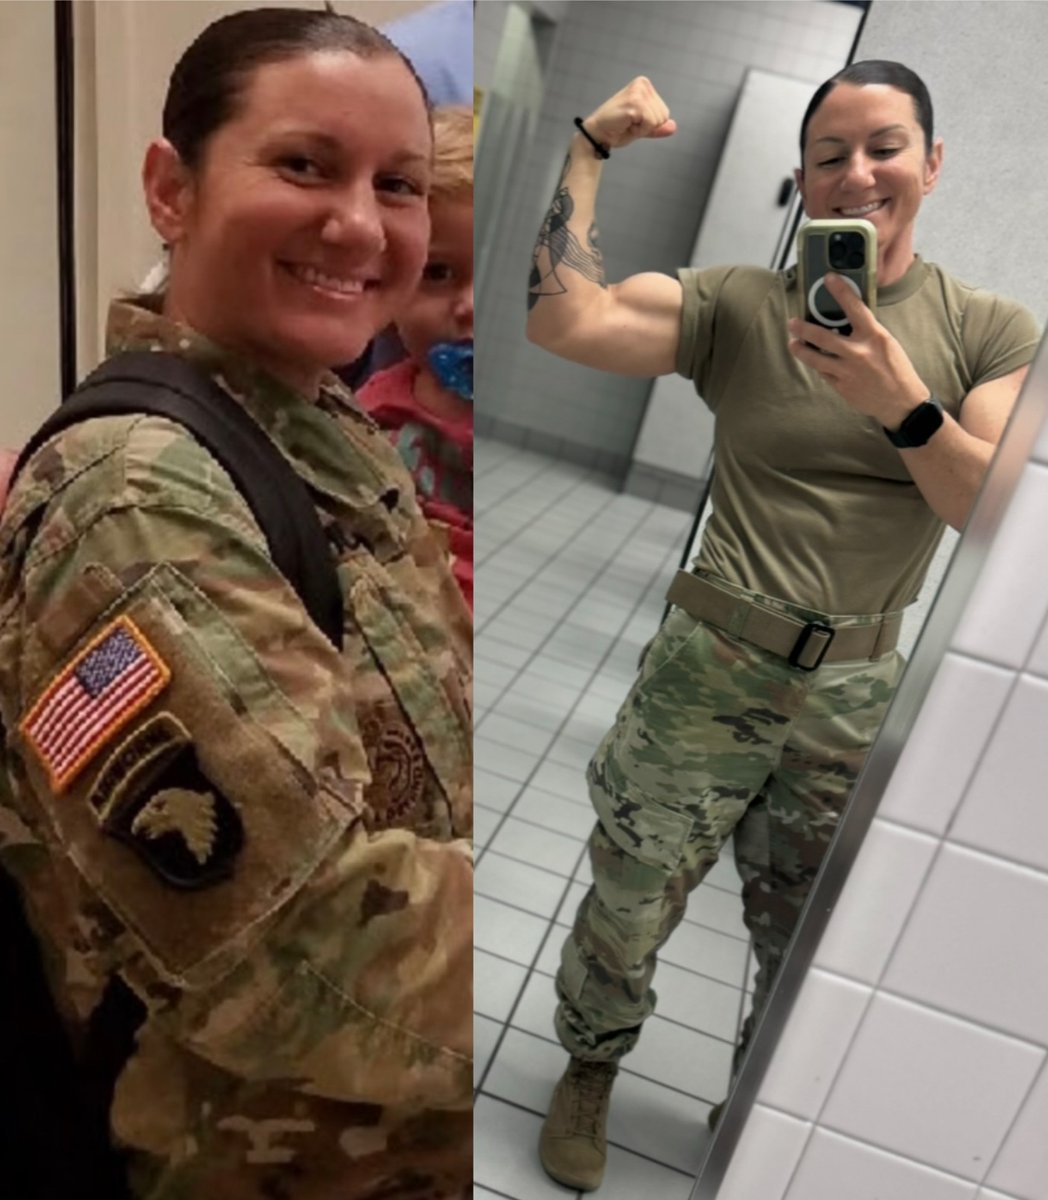 What a journey that I am on! . . . . #tbt #morelife #usarmy #usarmysoldier #transformation #enjoytheprocess #journey #militarylife #momlife